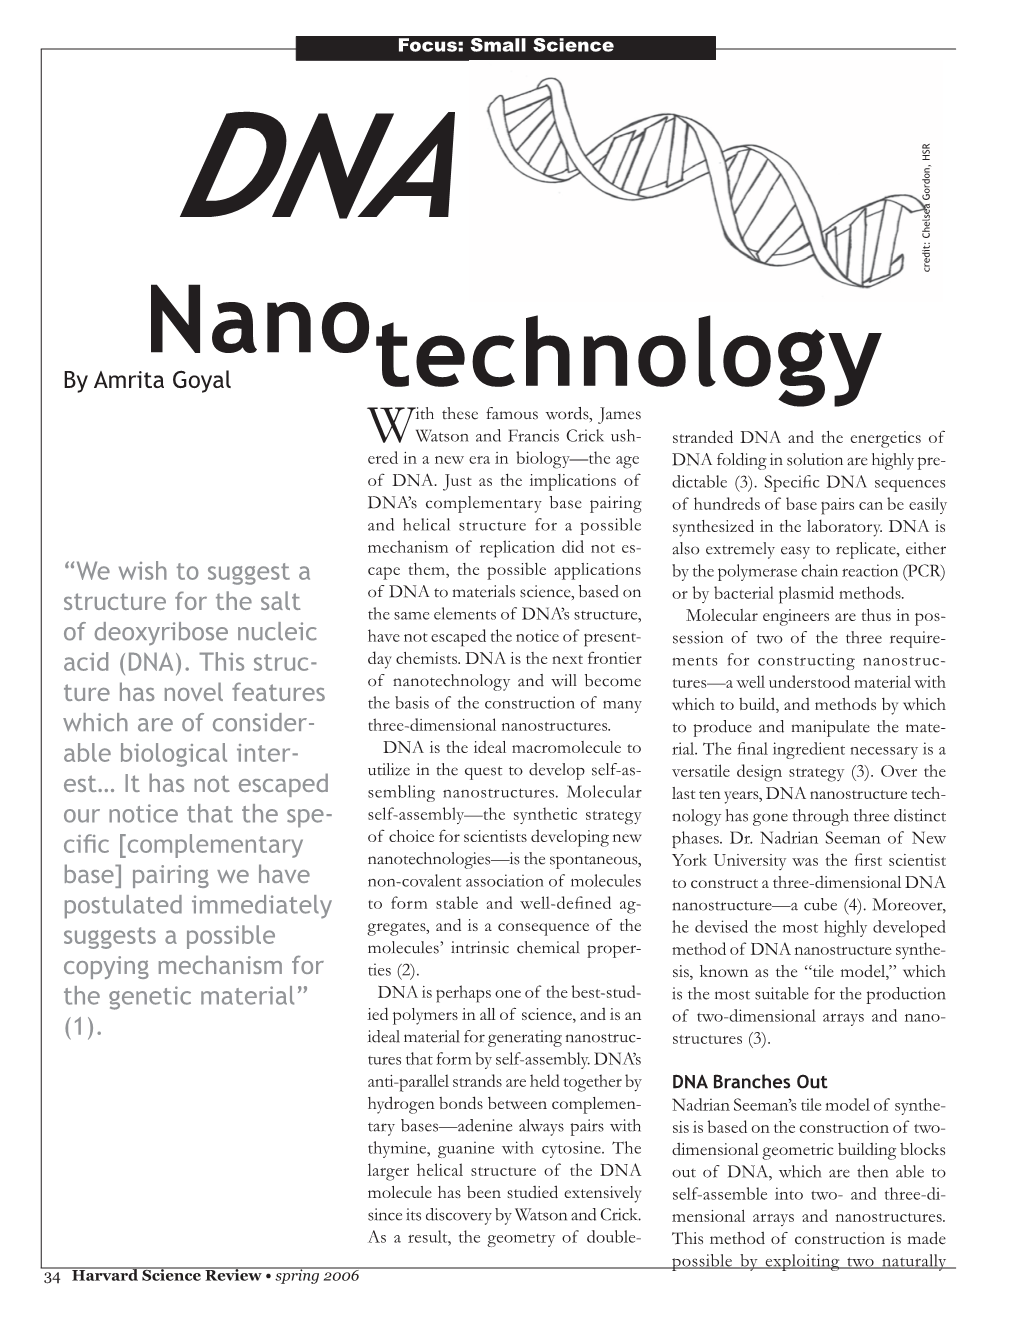 DNA Nanotechnology Has Applica- Structures That Dr